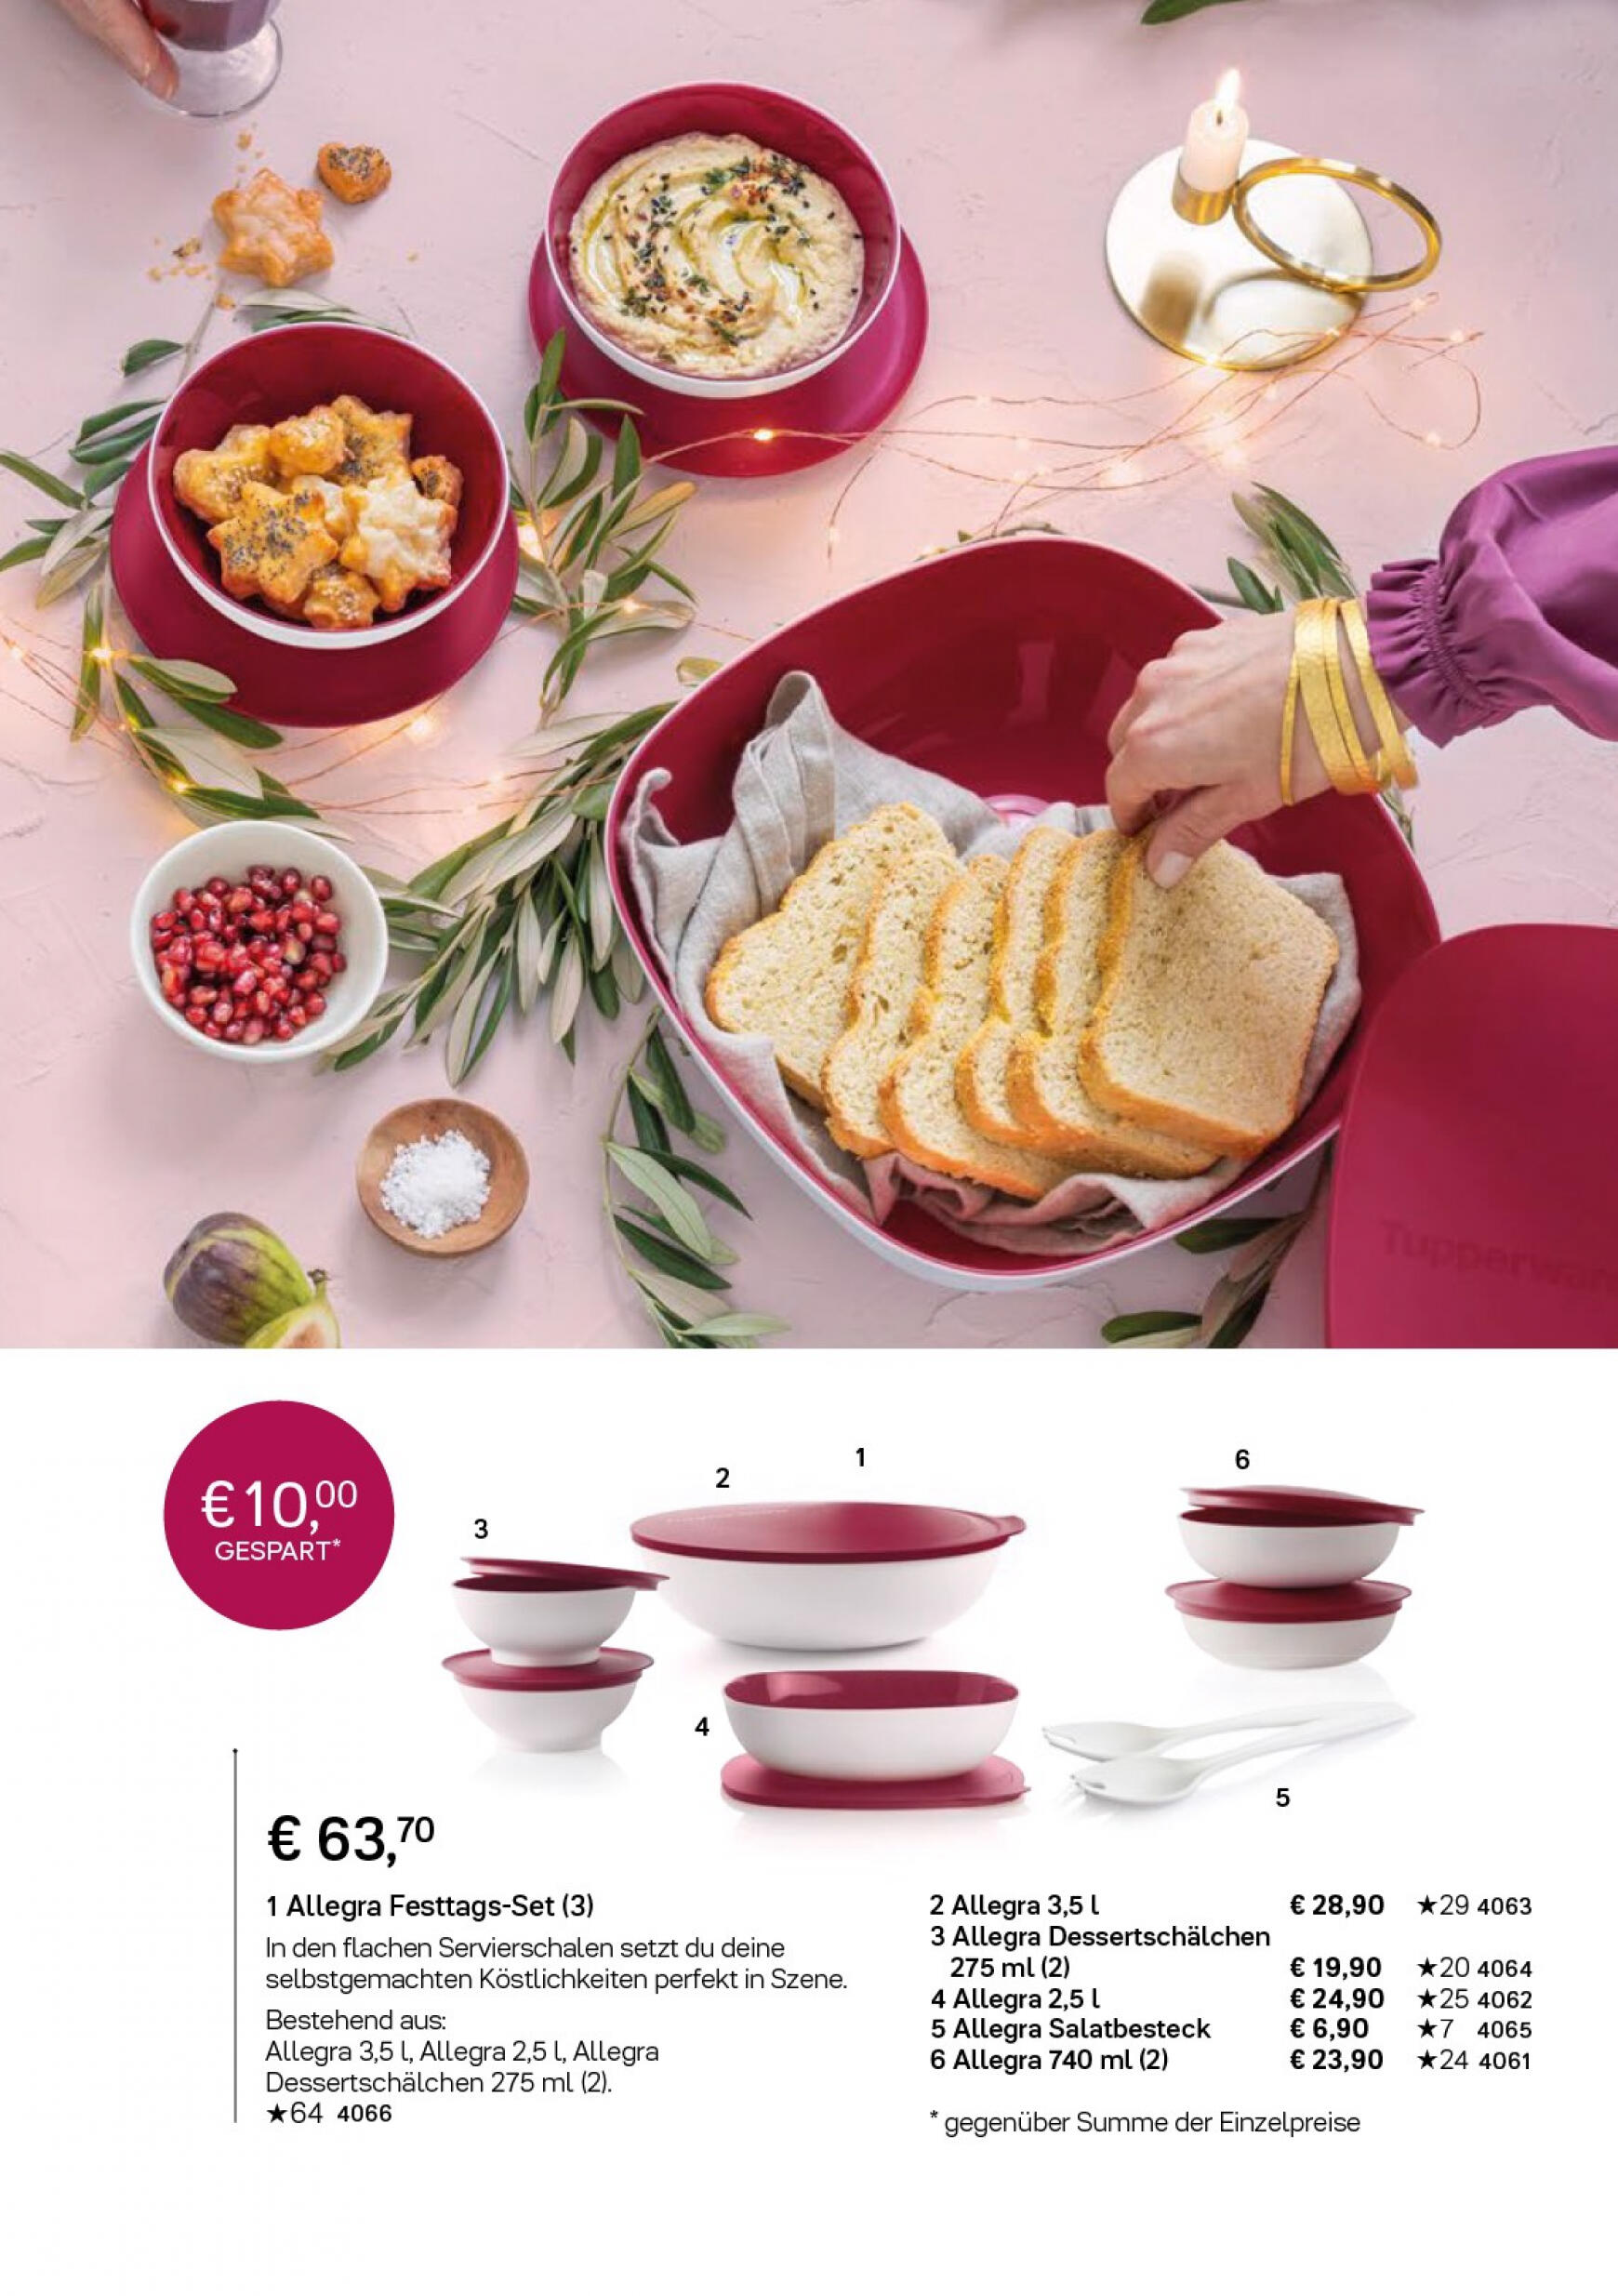 tupperware - Tupperware Online & Party - page: 3